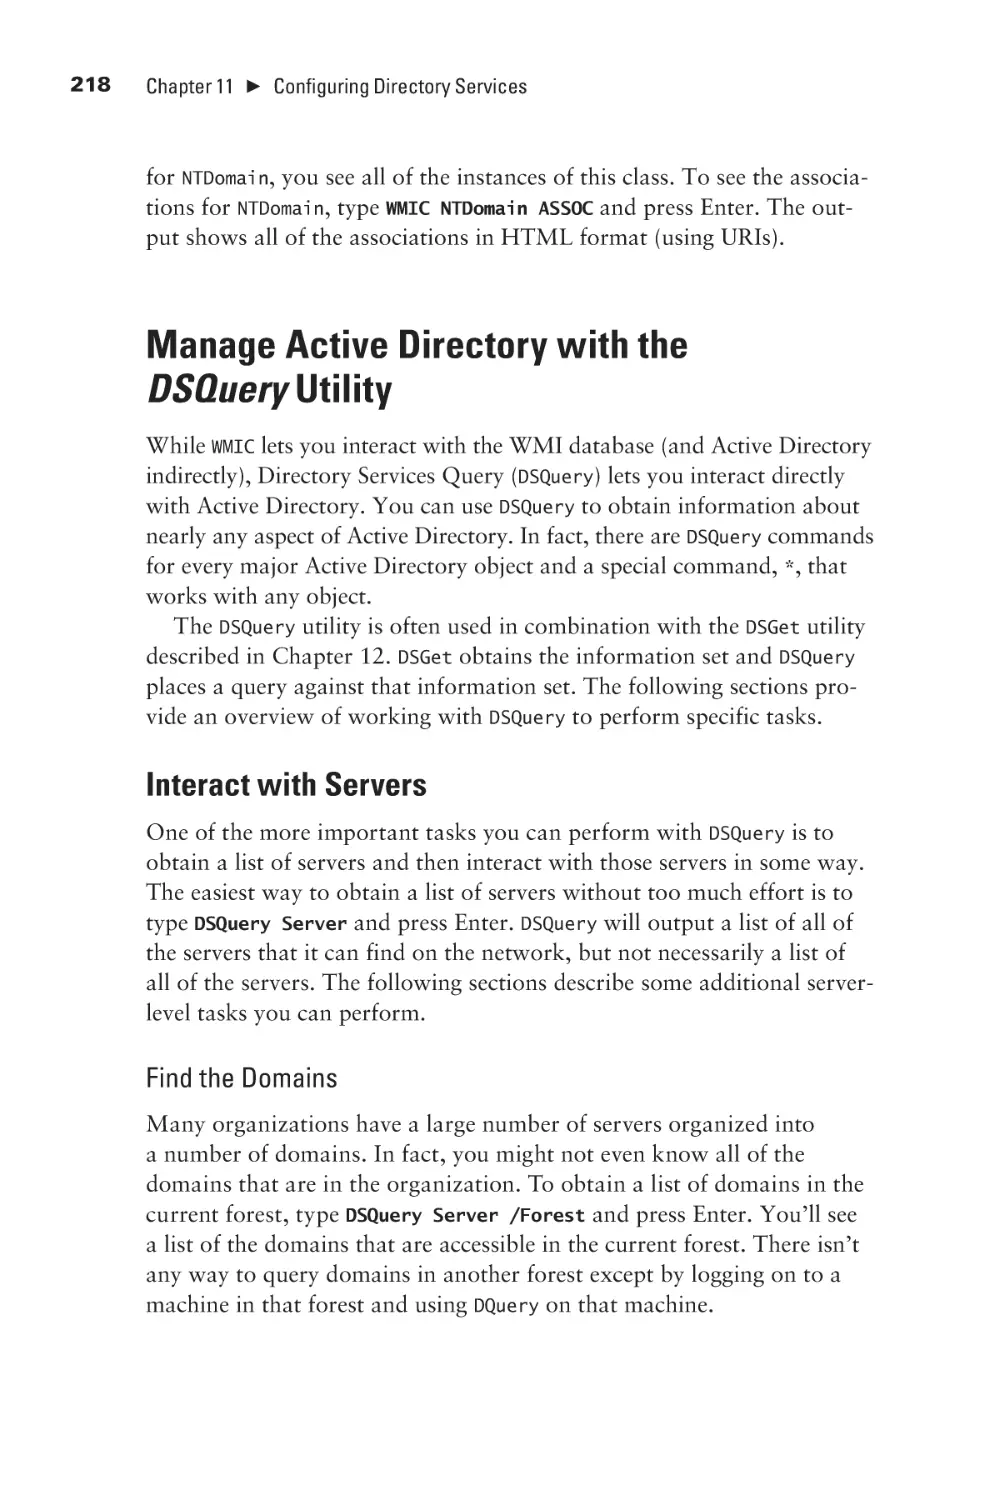 Manage Active Directory with the DSQuery Utility